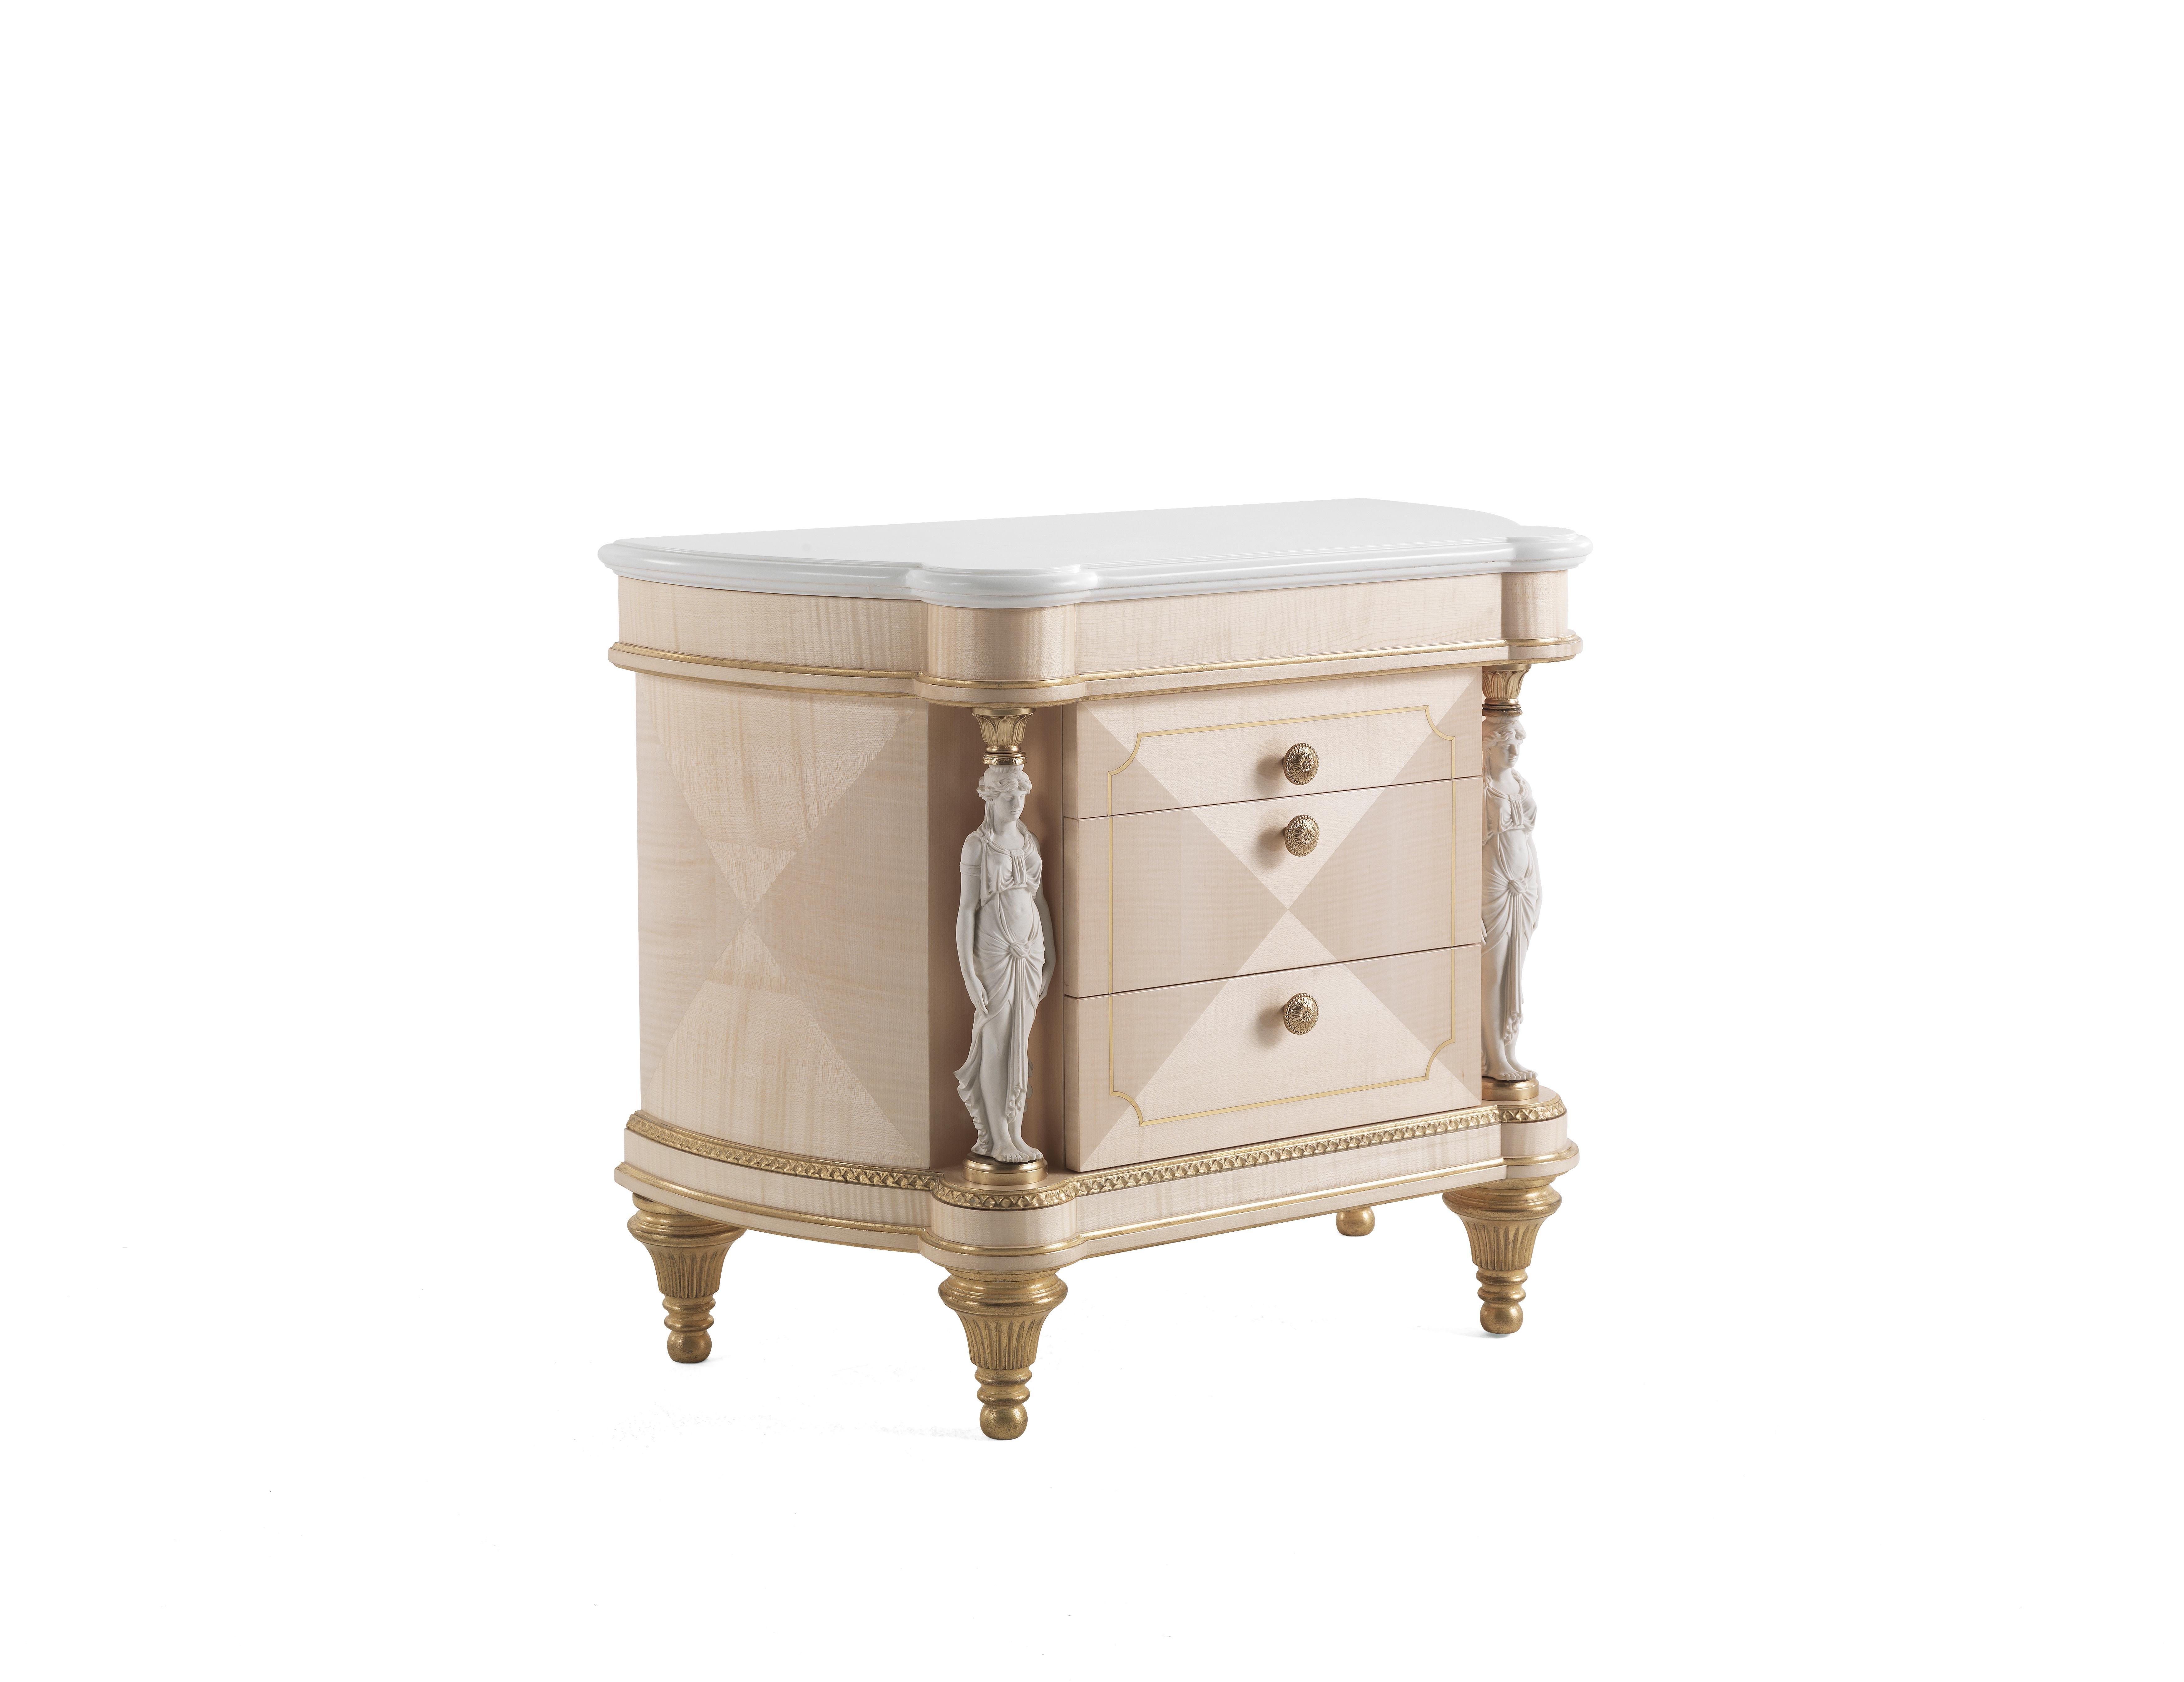 Toulouse night table with structure in multilayer maple. Three drawers. Profile and details are finished in antique gold with patina JG294. Decorative elements in metal are finished in gold. Statues with biscuit finishing as columns. Top in